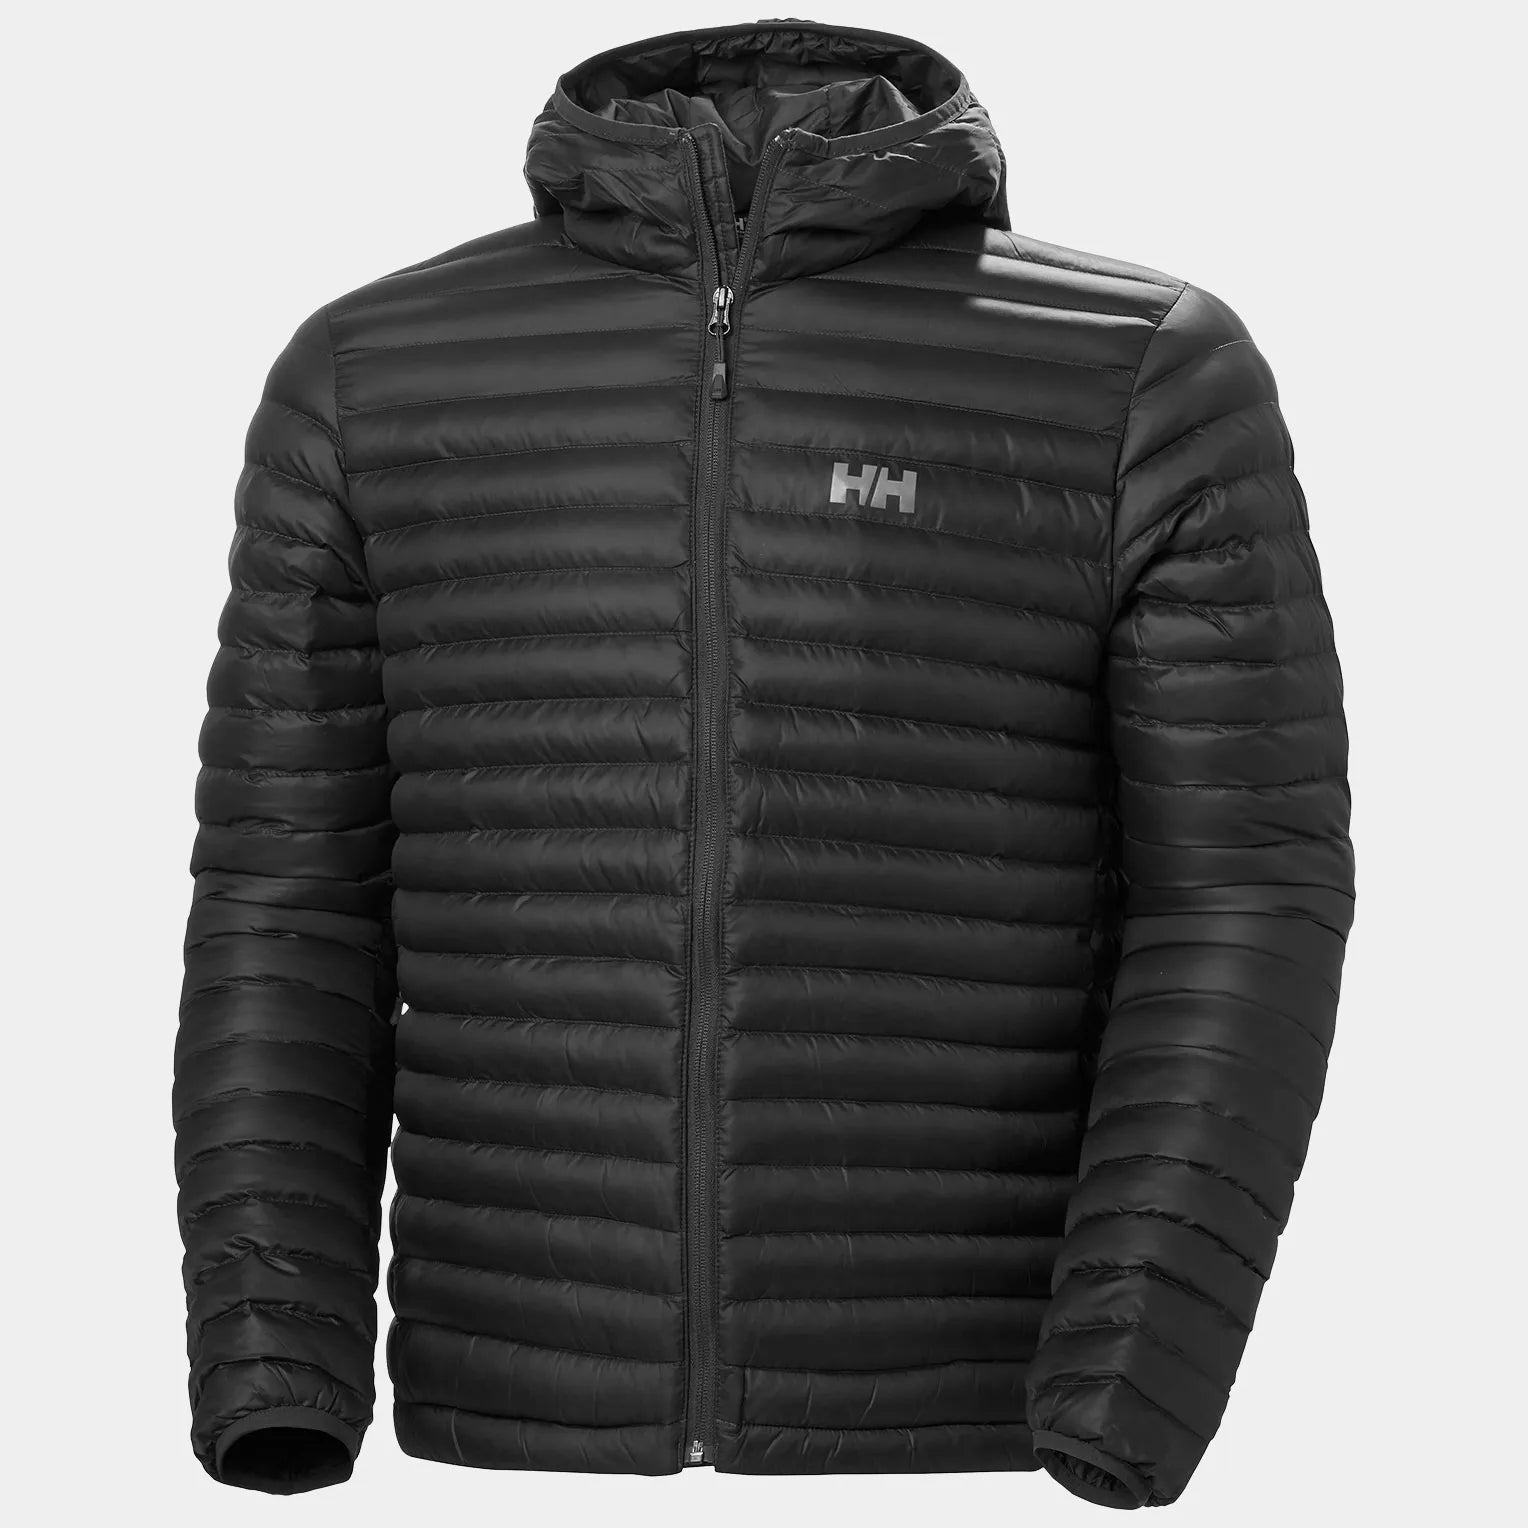 Men's Sirdal Hooded Insulated Jacket - Black